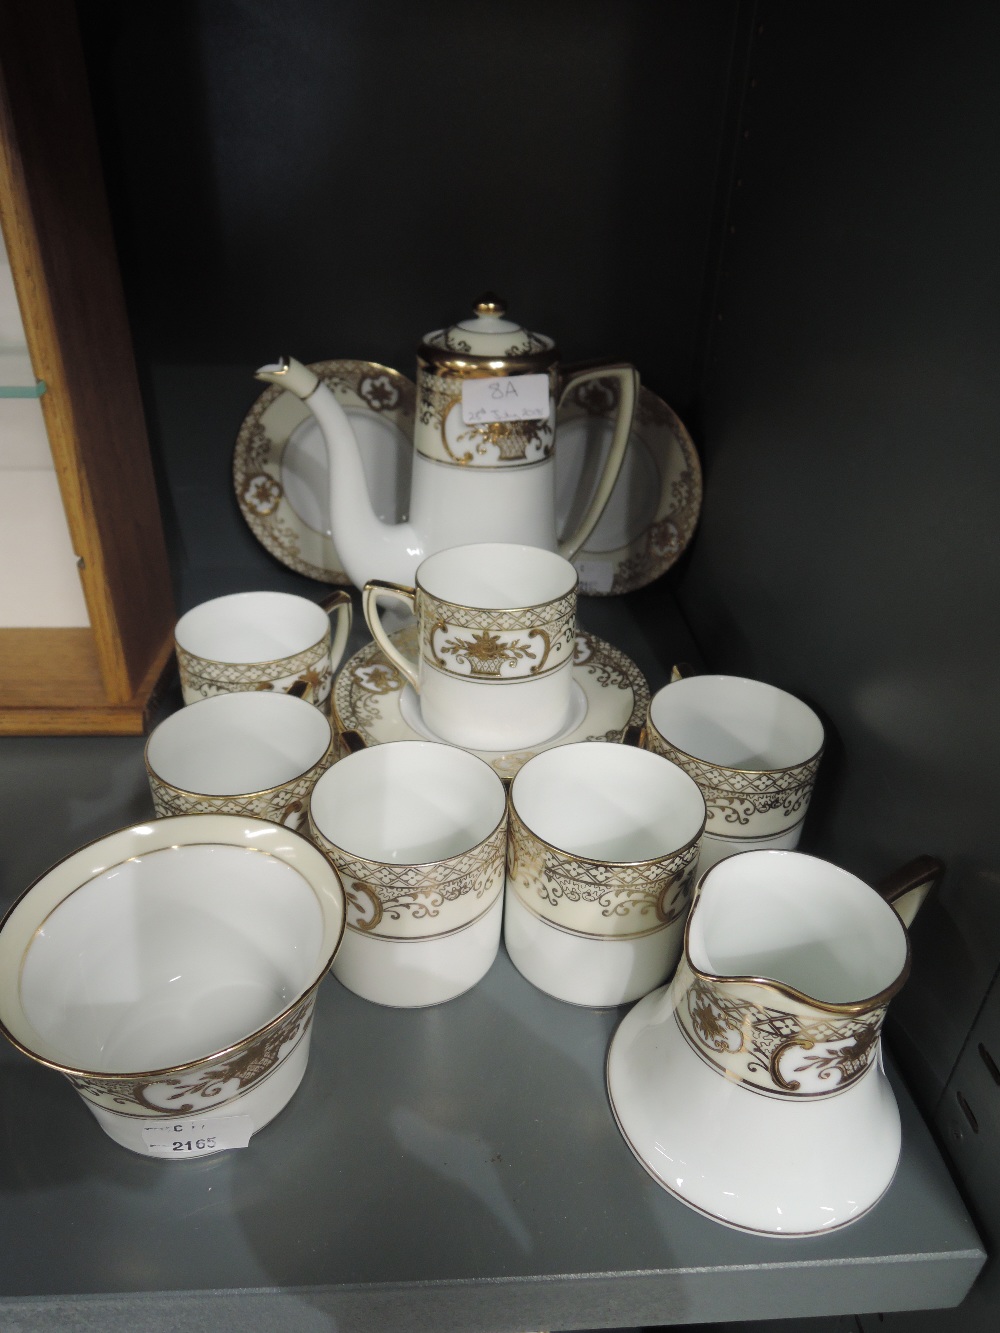 A Noritake coffee service in cream and gilt on a white ground